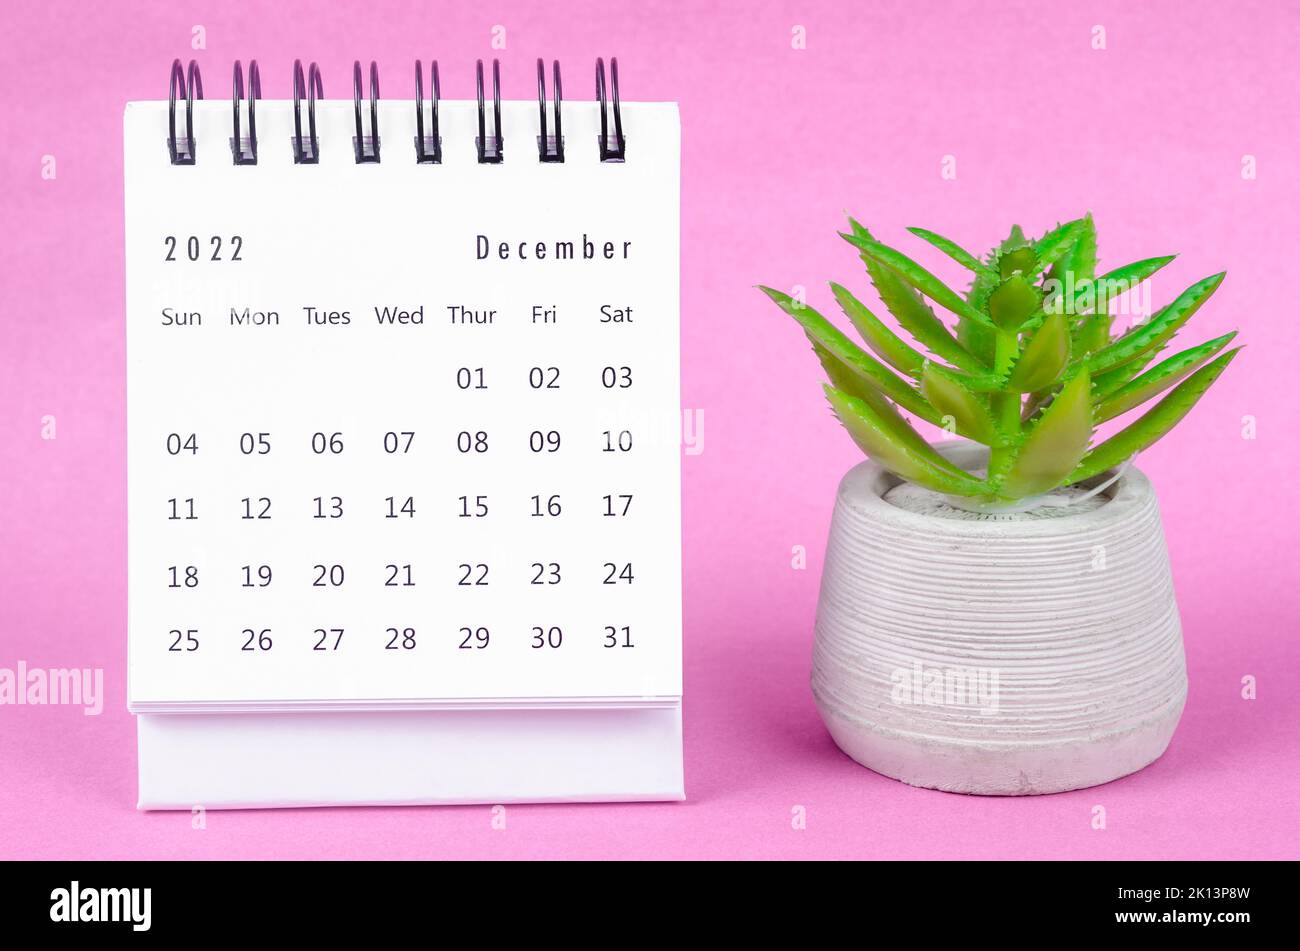 December 2022 Monthly desk calendar for 2022 year with plant pot on pink background. Stock Photo